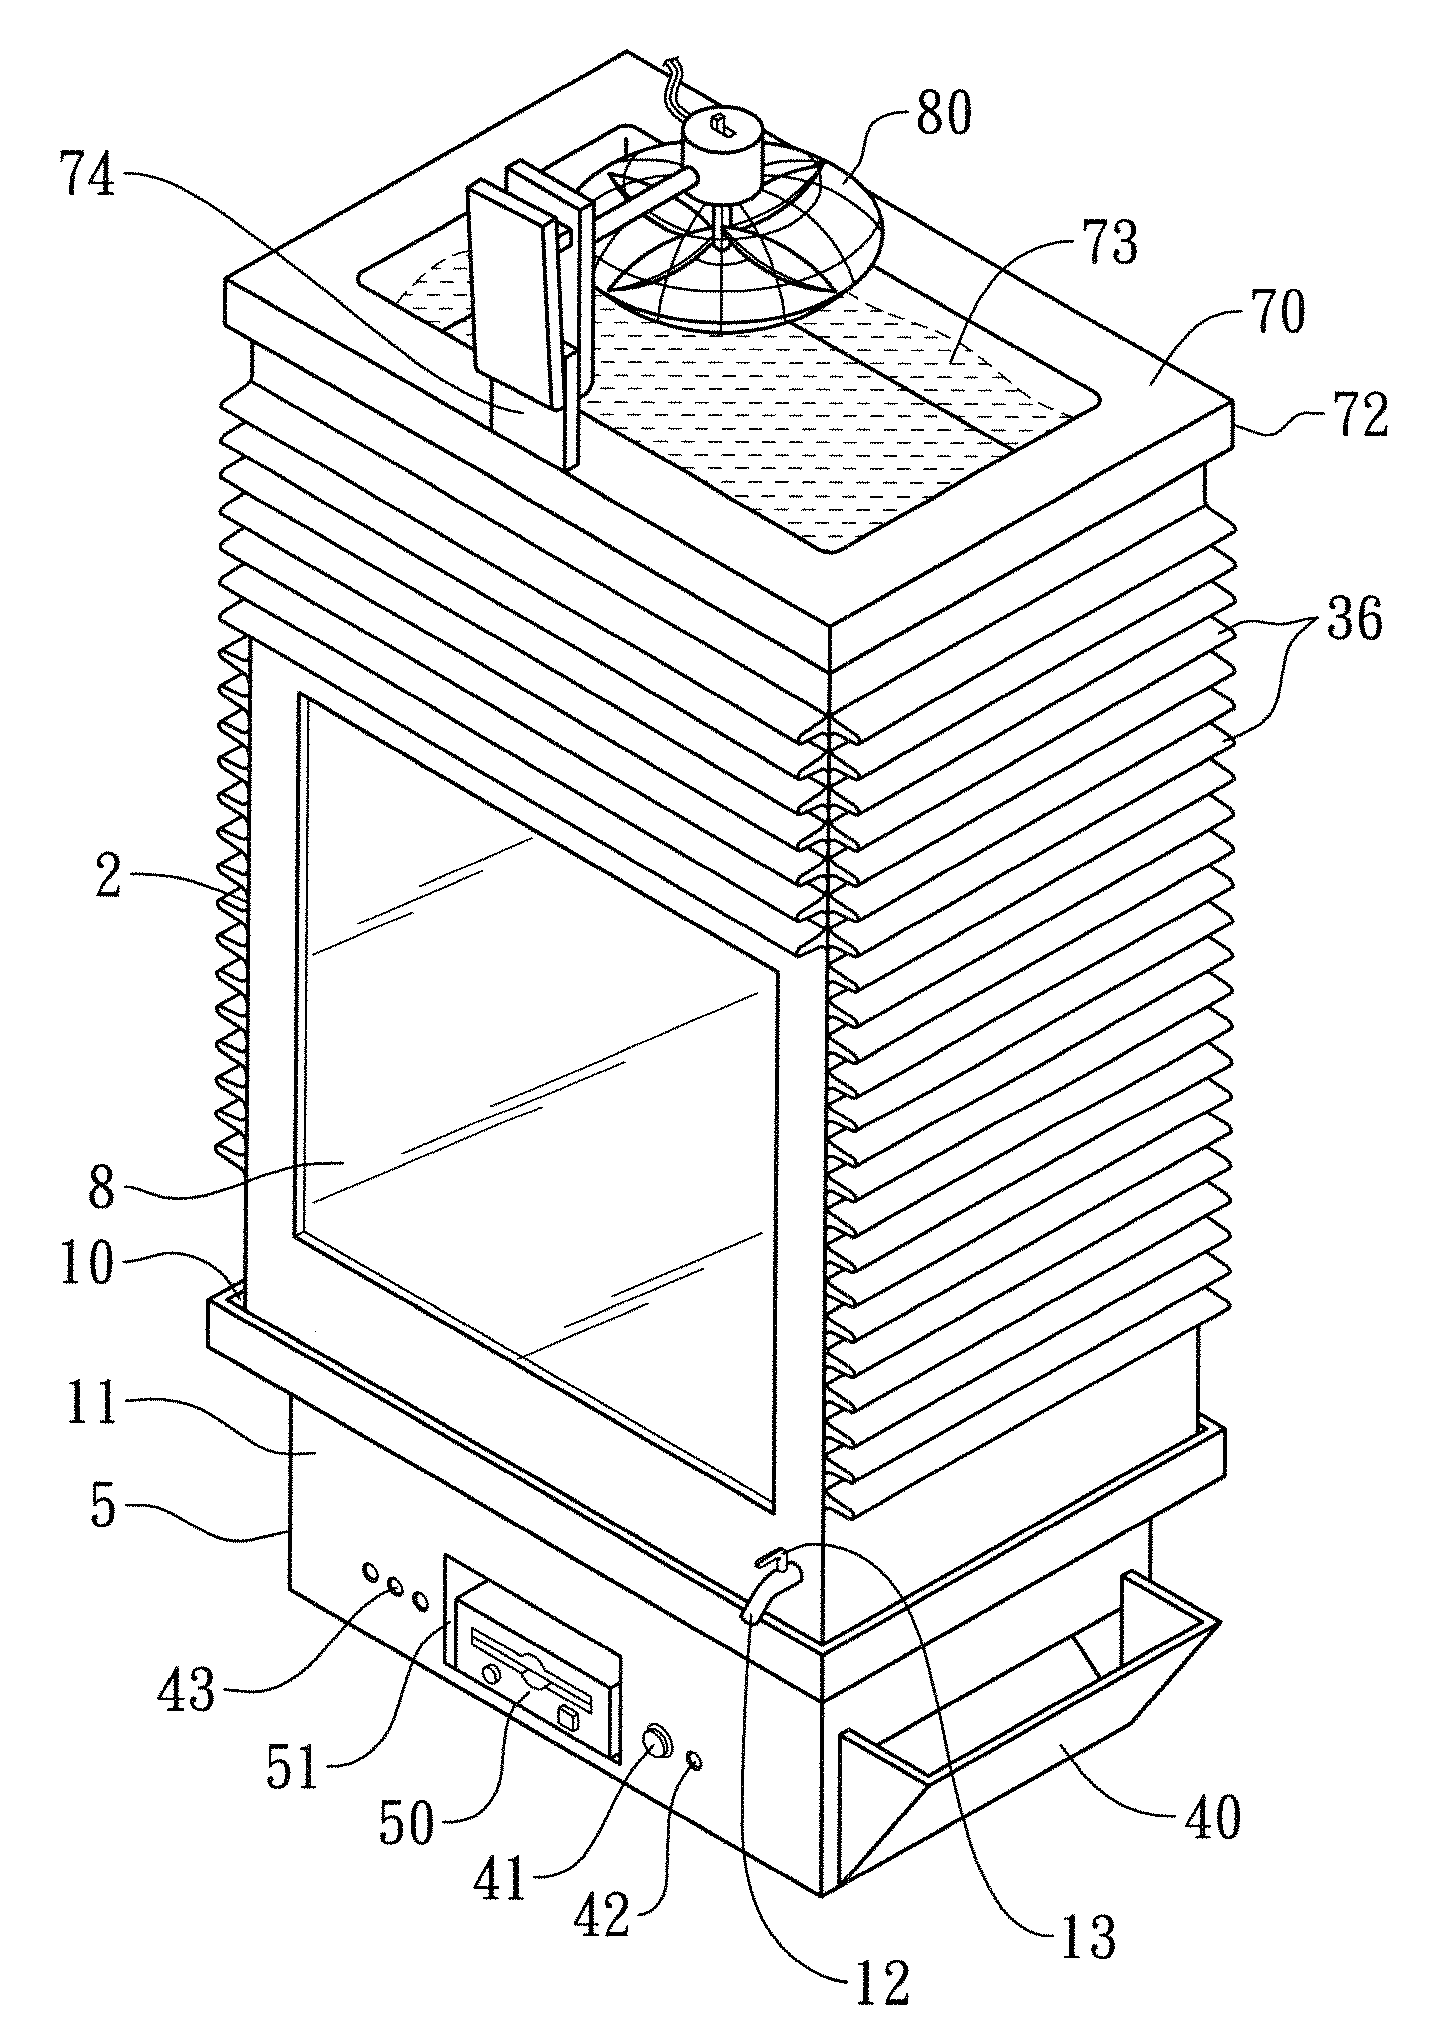 Enclosure for Confining the Released Chemicals of Electrical Devices